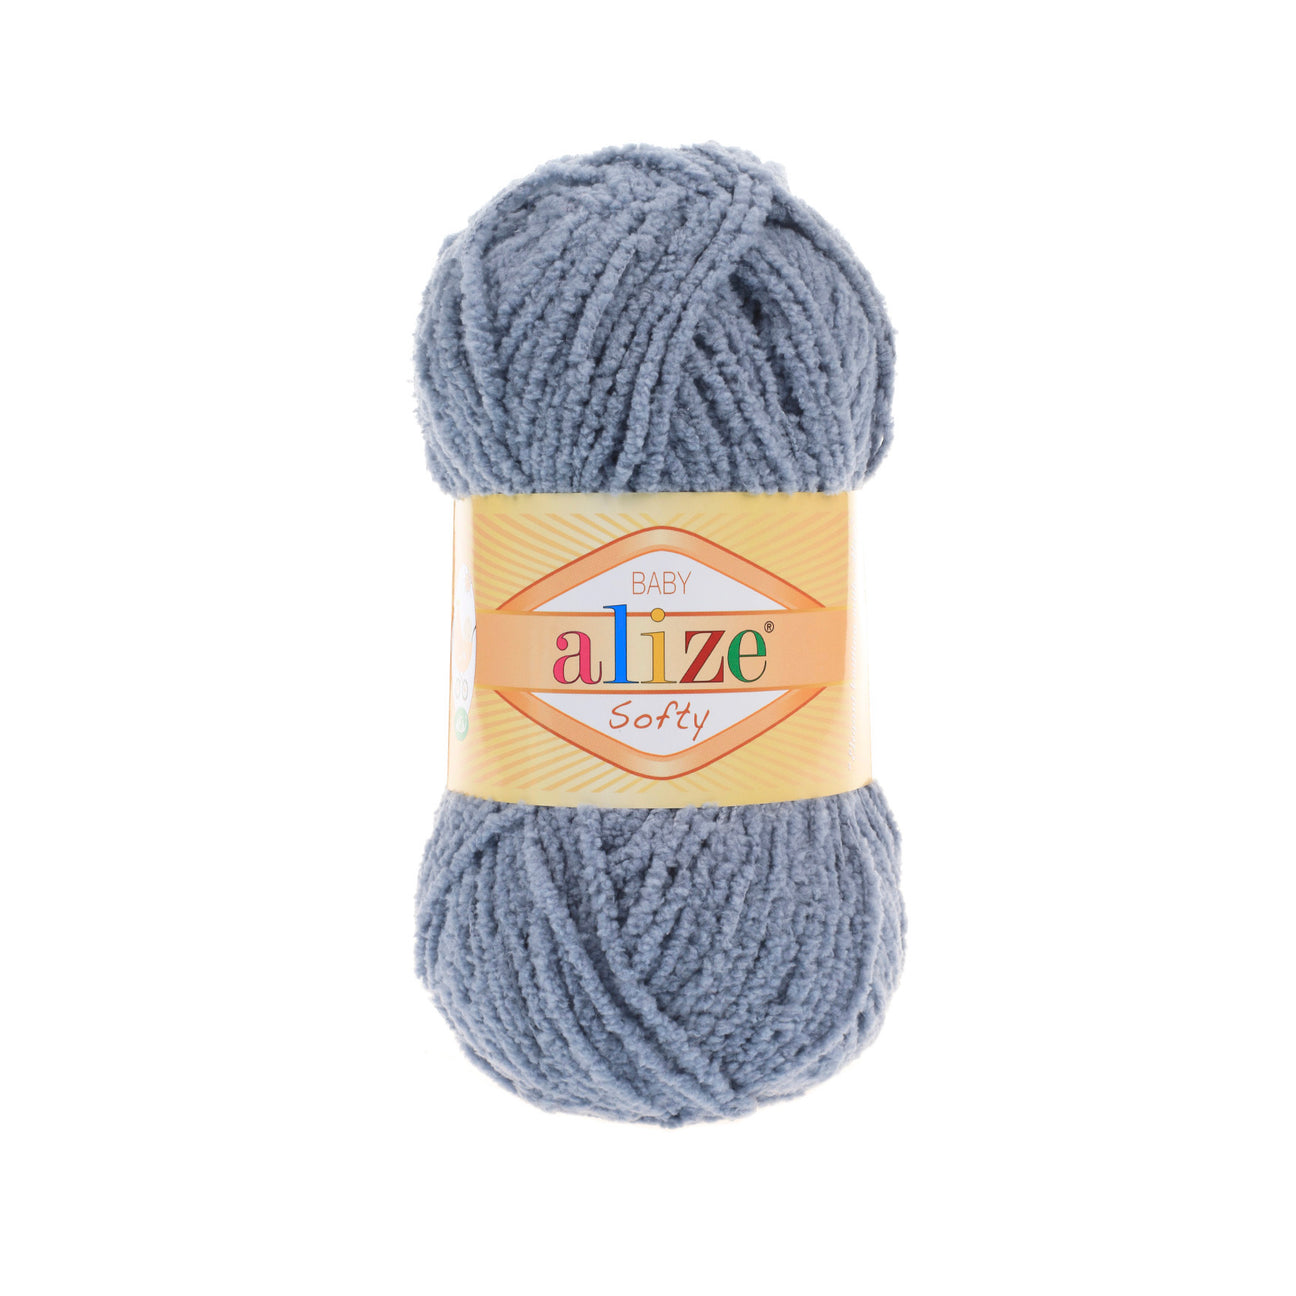  4 skn (4 Balls) Alize Softy Plus, Knitted Yarn. Baby